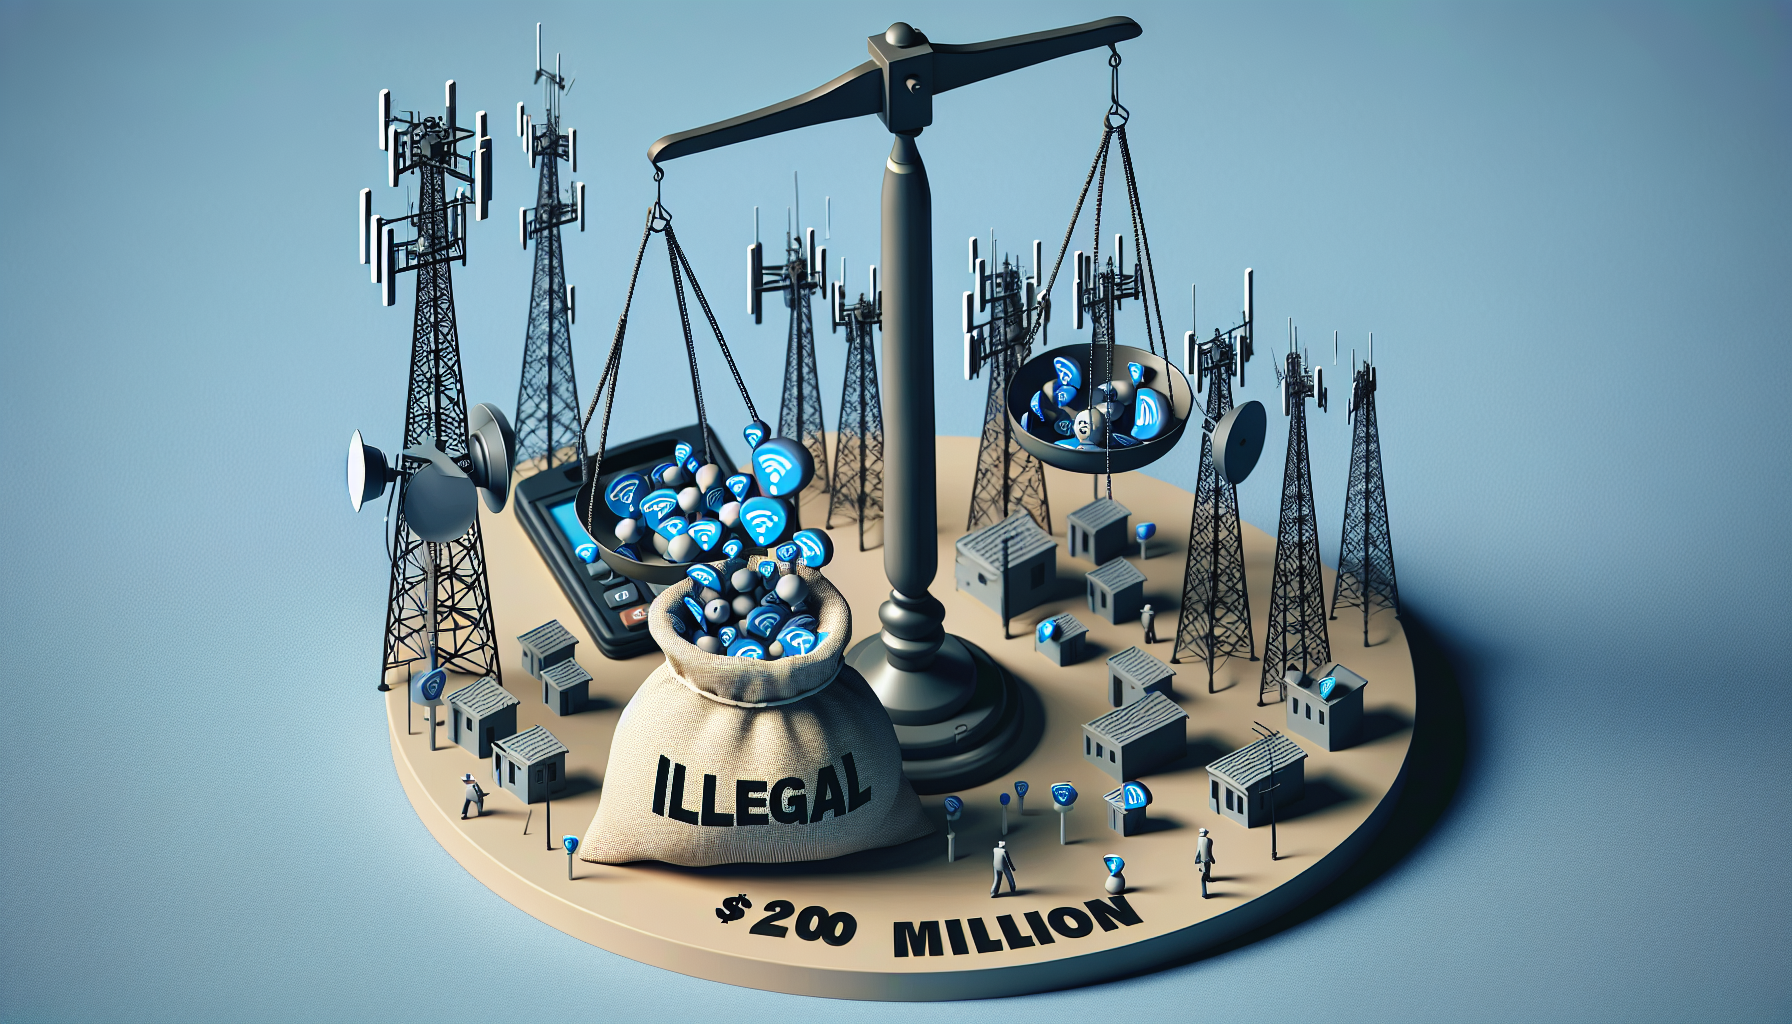 The Federal Communications Commission (FCC) has levied a fine of $200 million on leading US wireless providers for illegally selling customer location data.